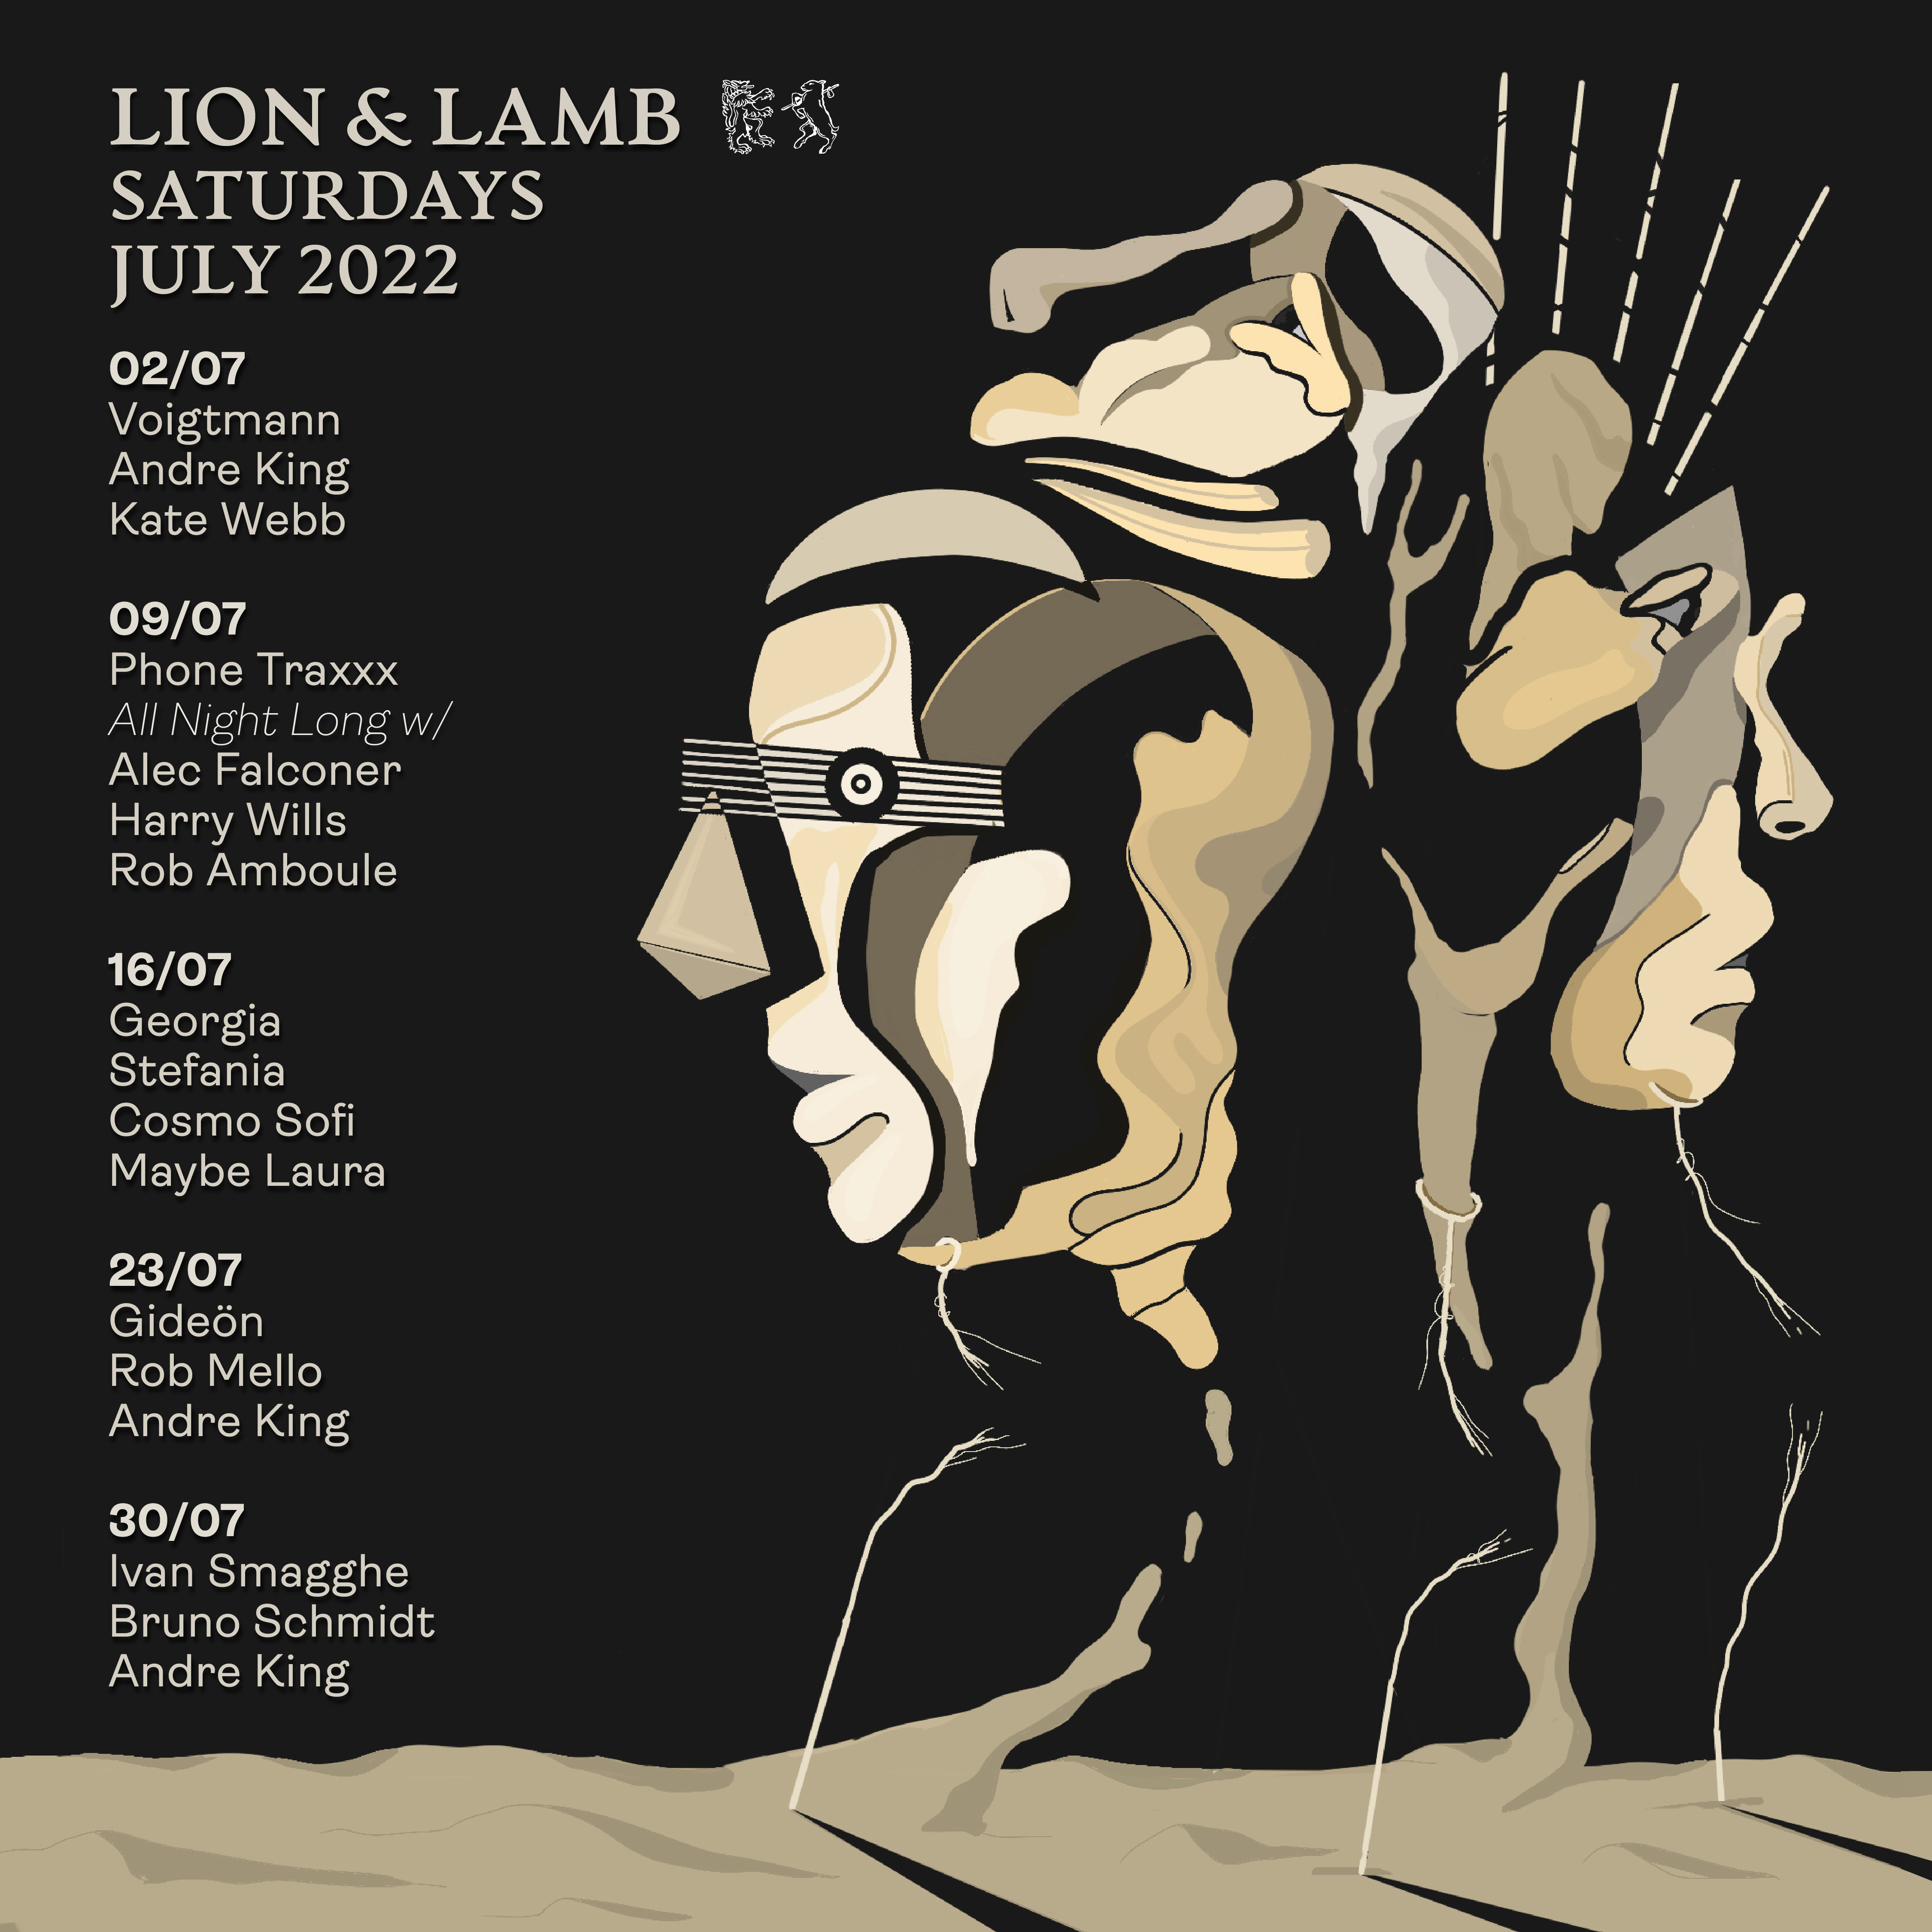 Lion & Lamb Saturdays with Ivan Smagghe, Bruno Schmidt and Andre King - Flyer front